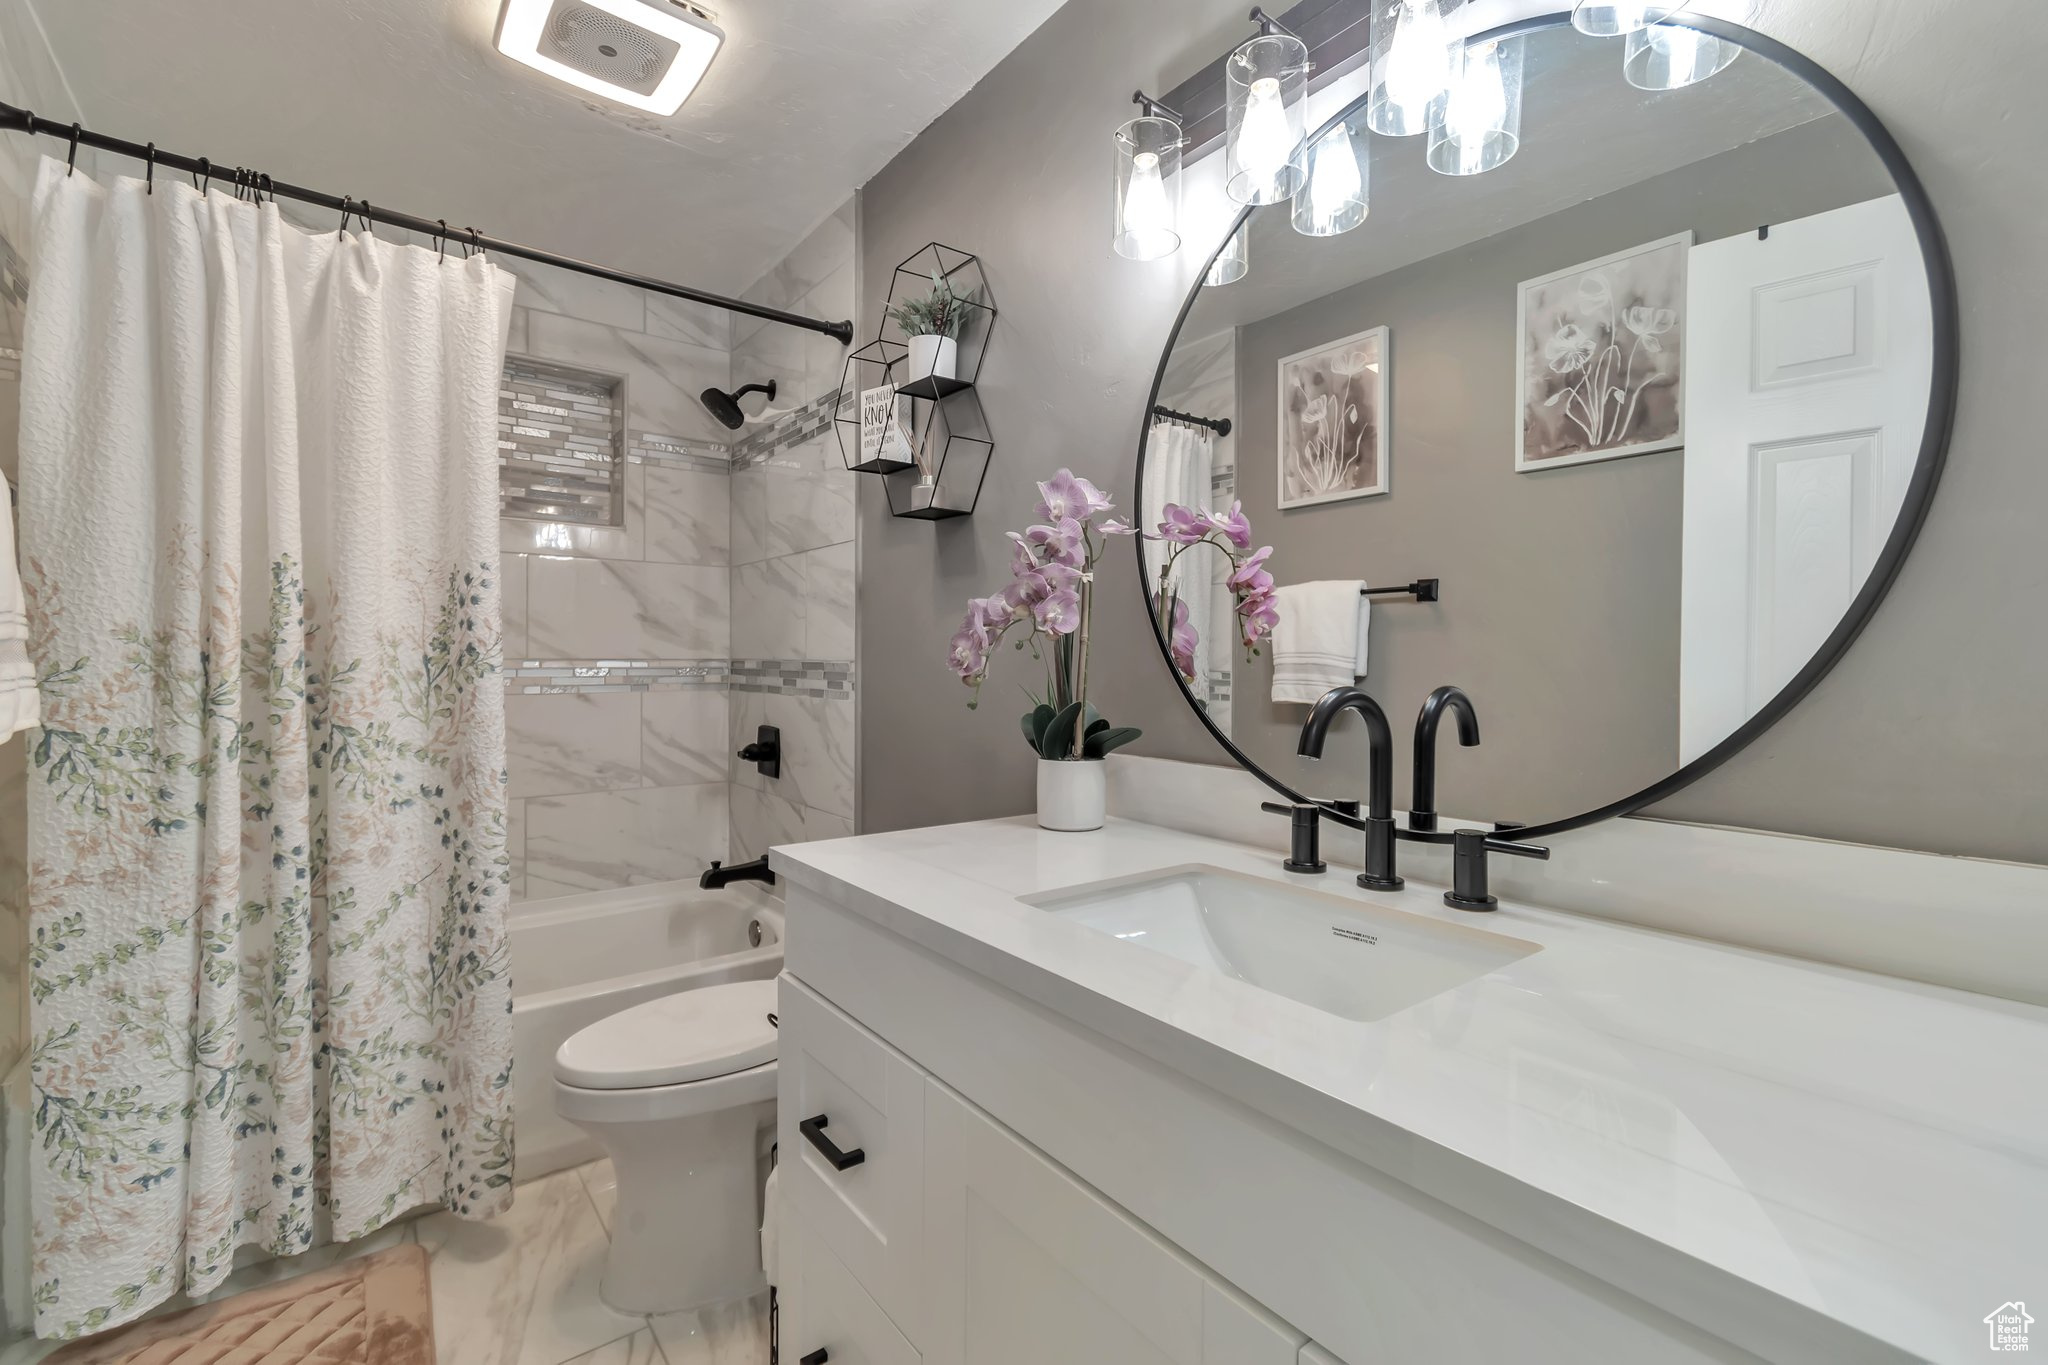 Full bathroom with oversized vanity, shower / bath combination with curtain, tile floors, and toilet